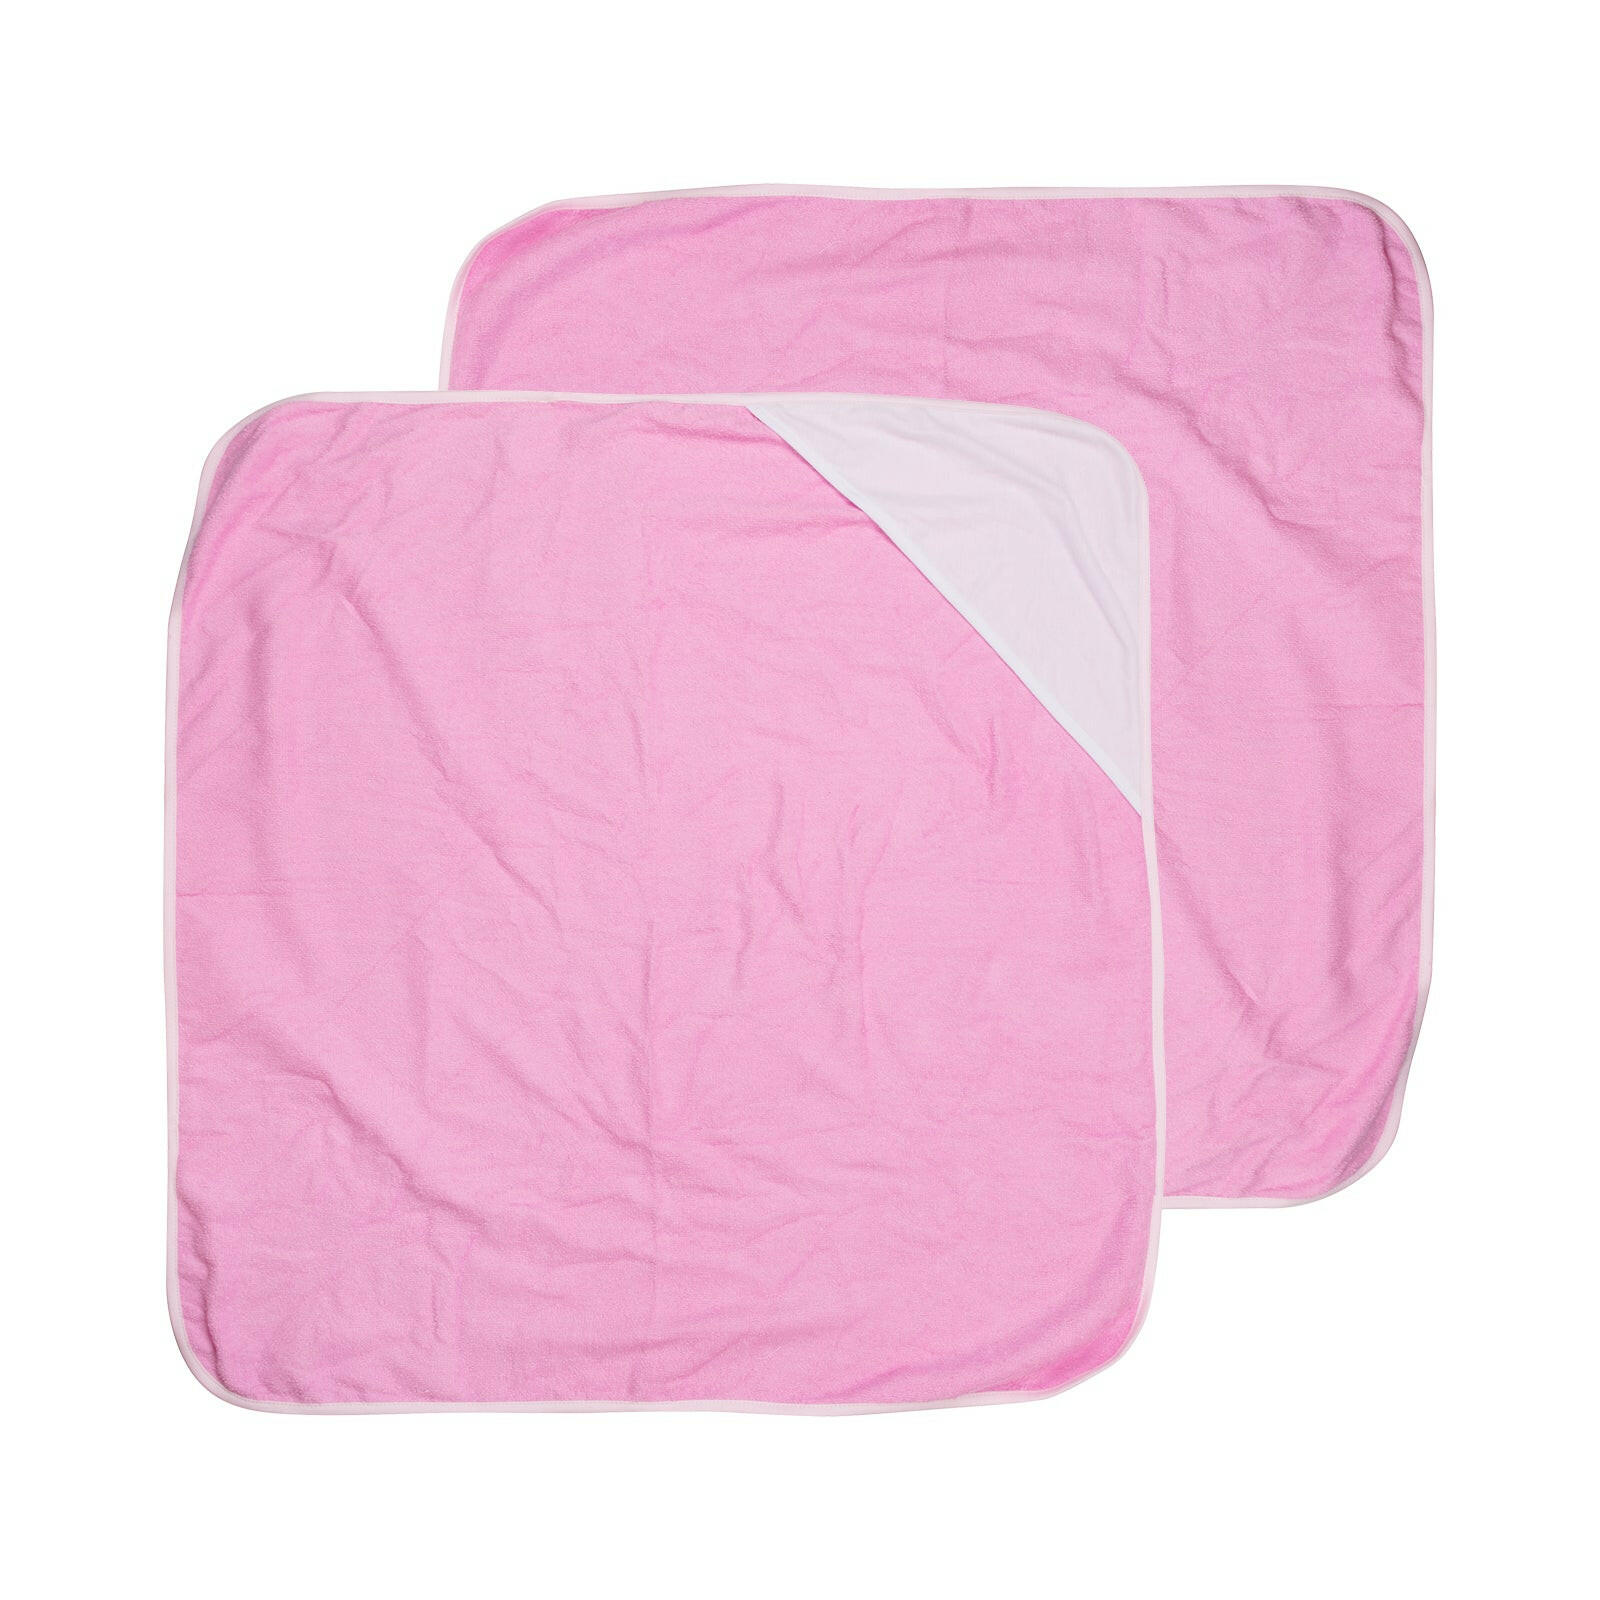 Pink Sublimation Hooded Towels - 2 Pack.